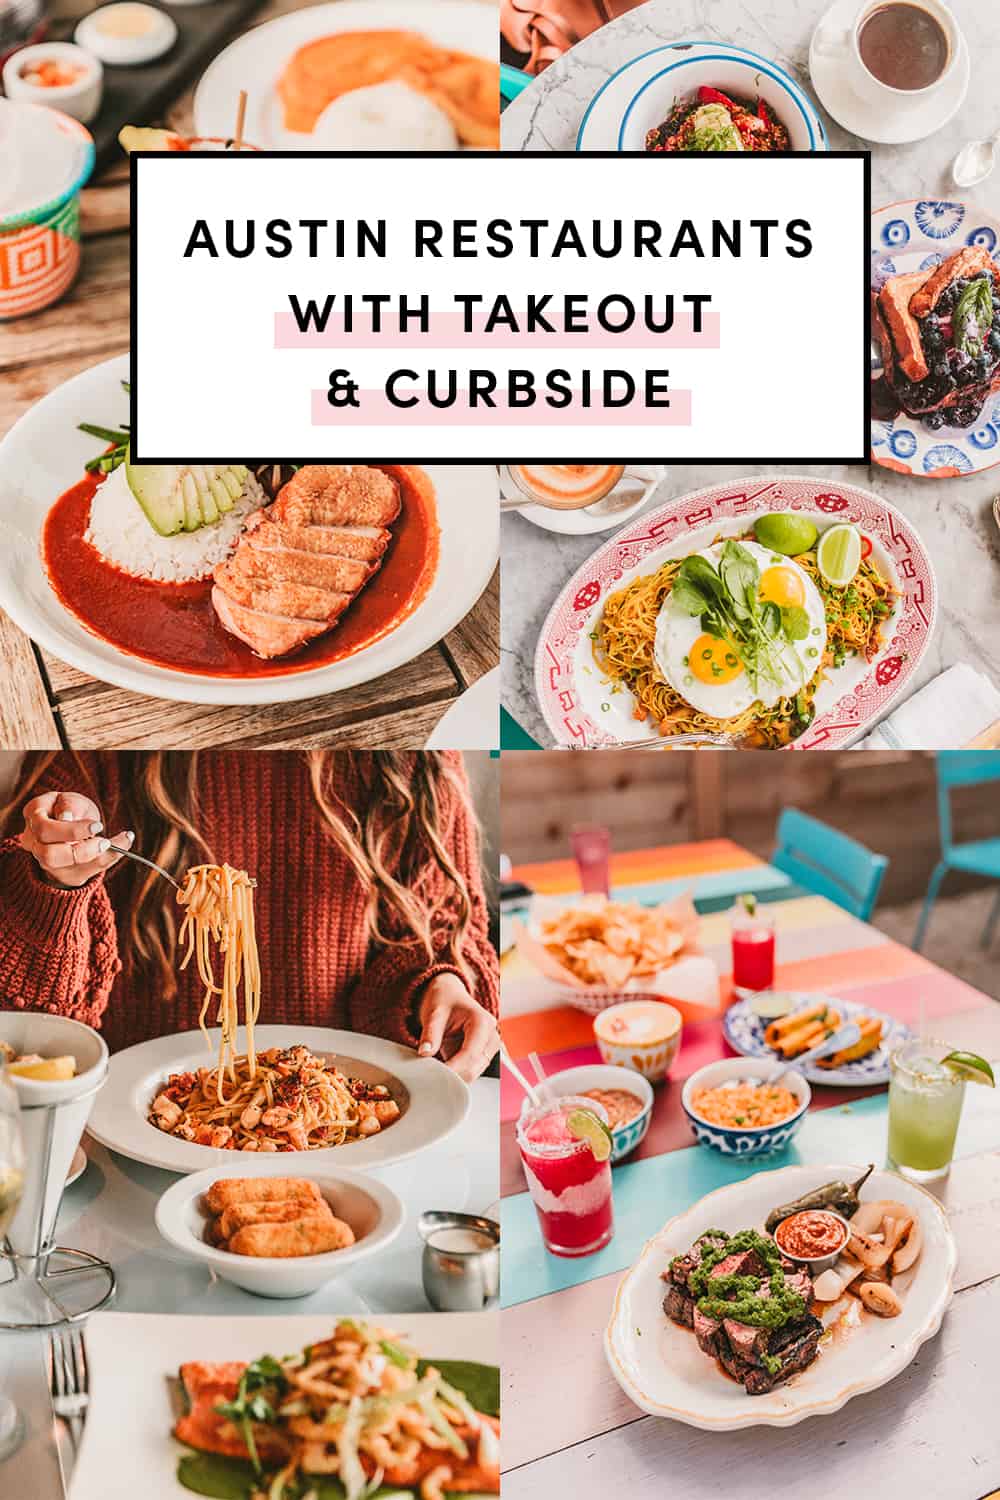 Austin Restaurants with Curbside with Takeout